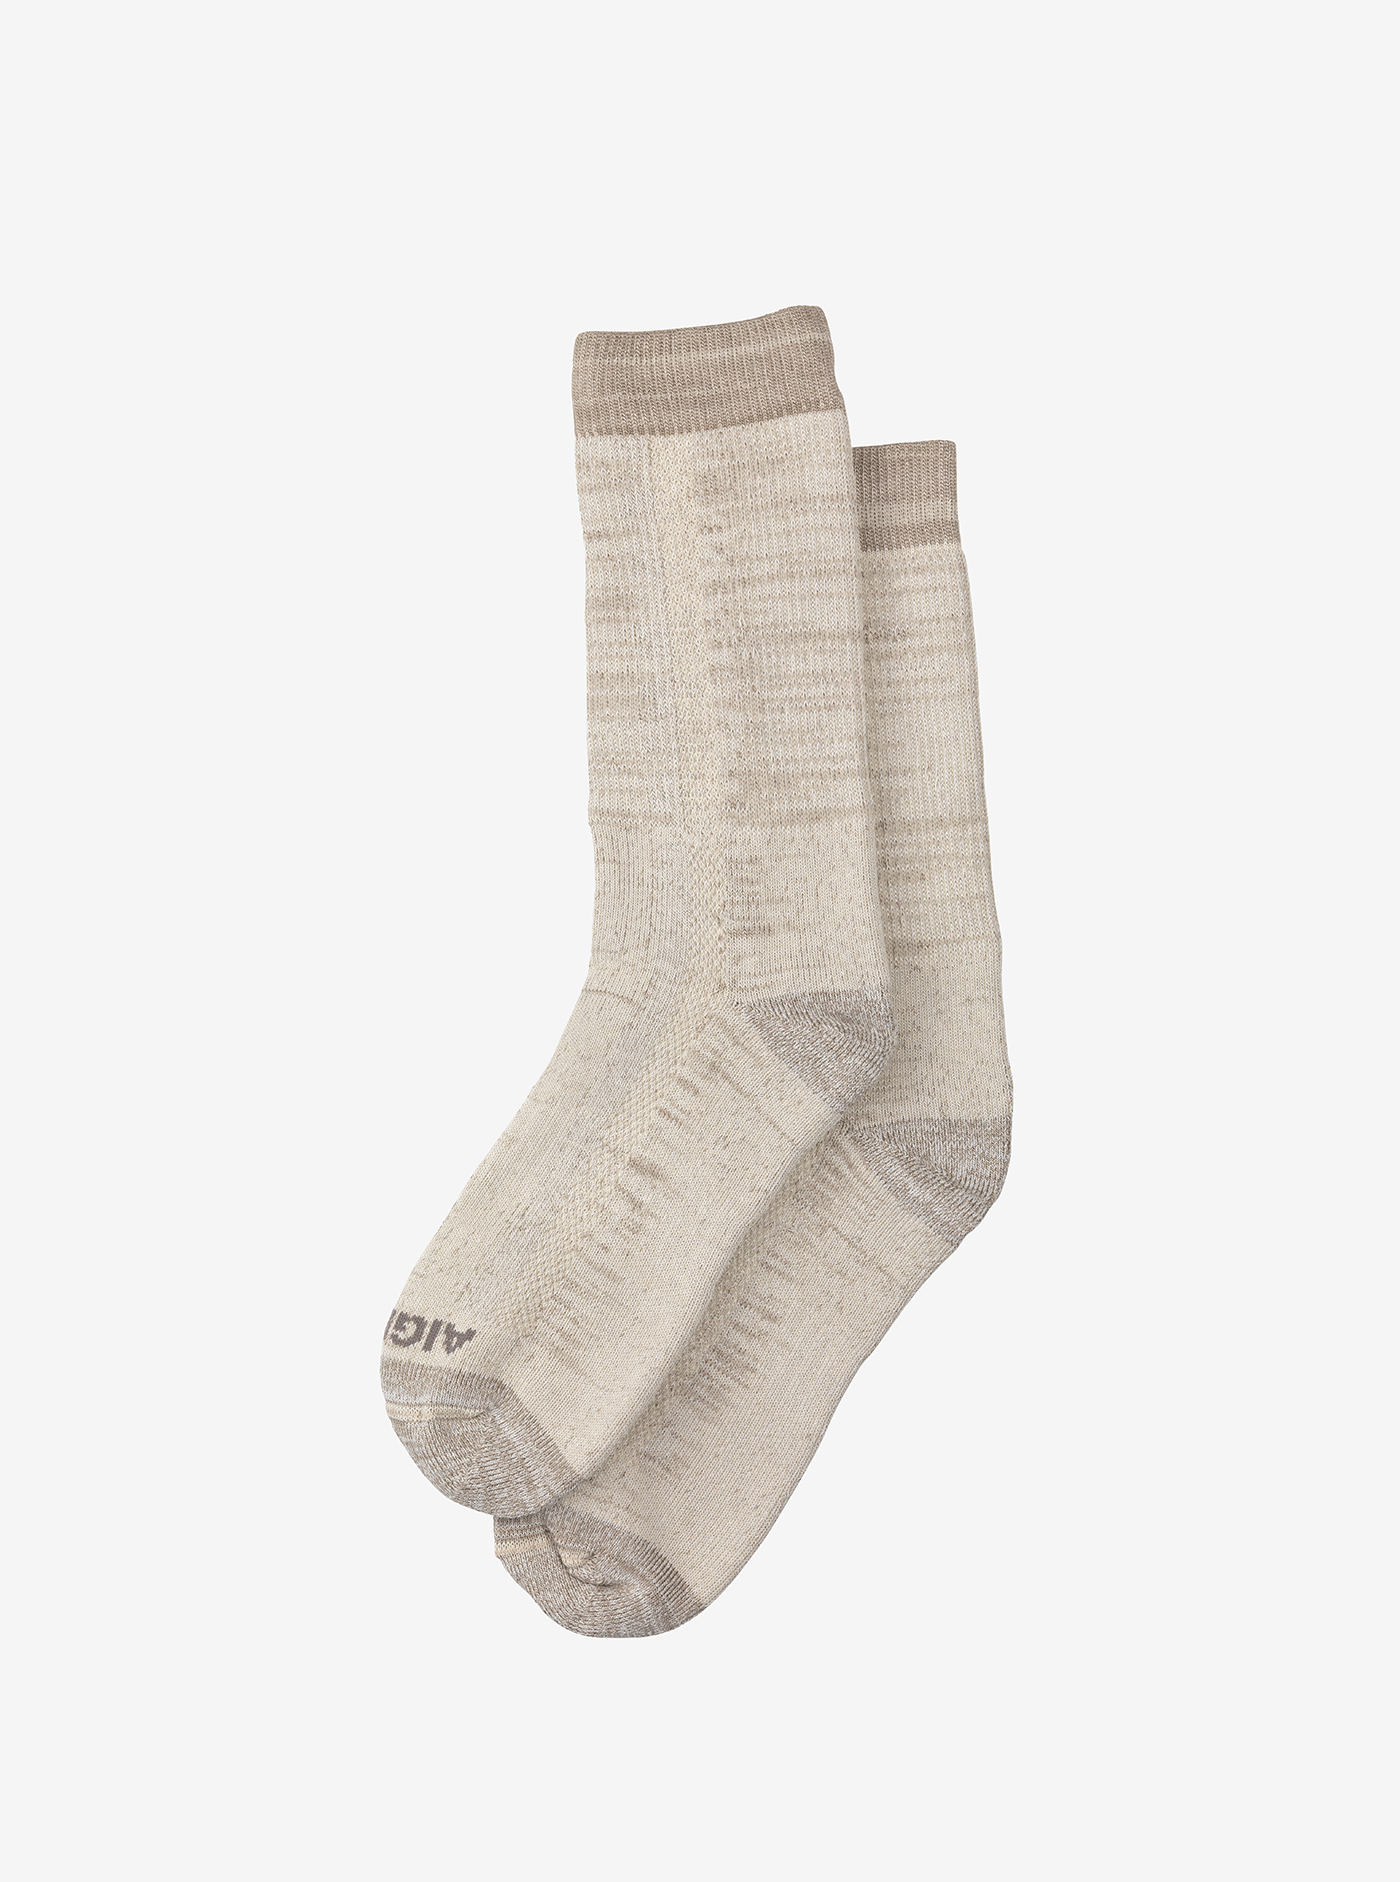 Chaussettes en bambou made in France